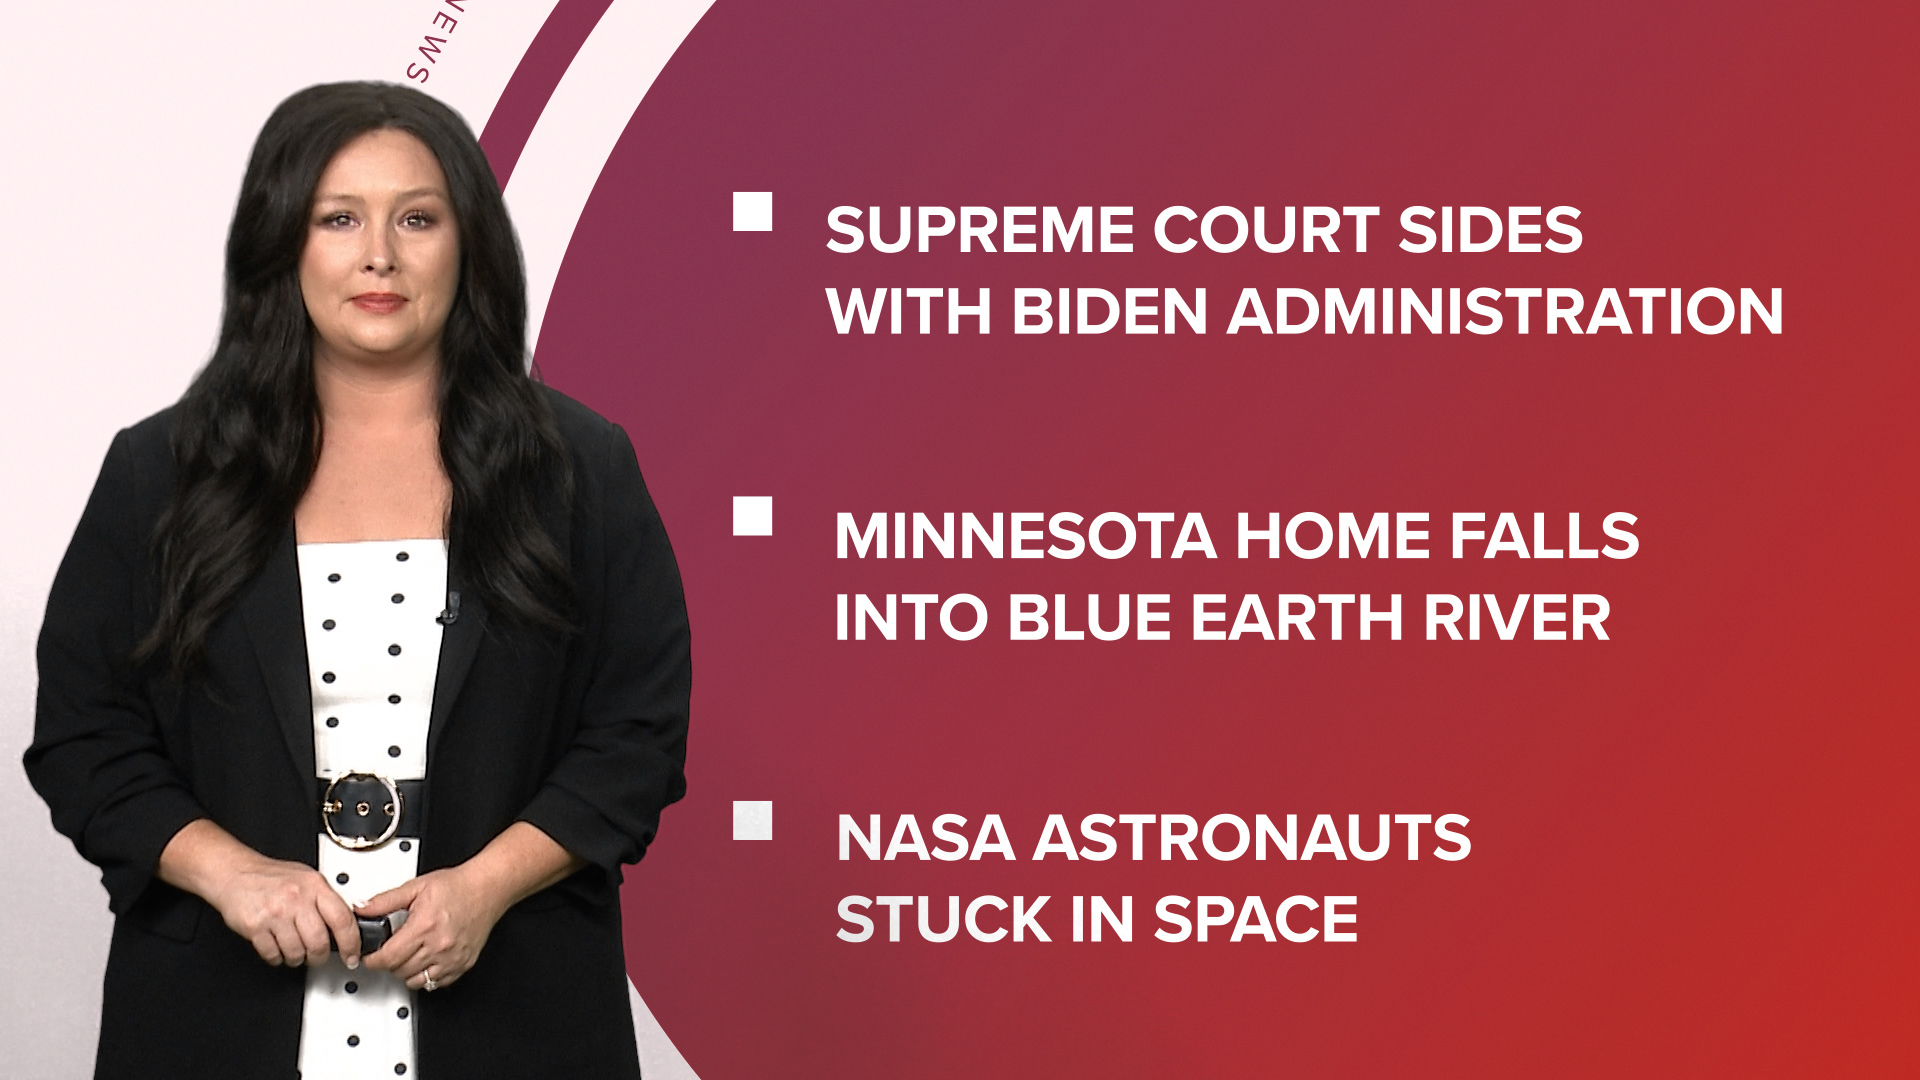 A look at what is happening in the news from flooding concerns for Minnesota's Rapidan Dam to NASA astronauts stuck at the ISS and pandas on their way to San Diego.